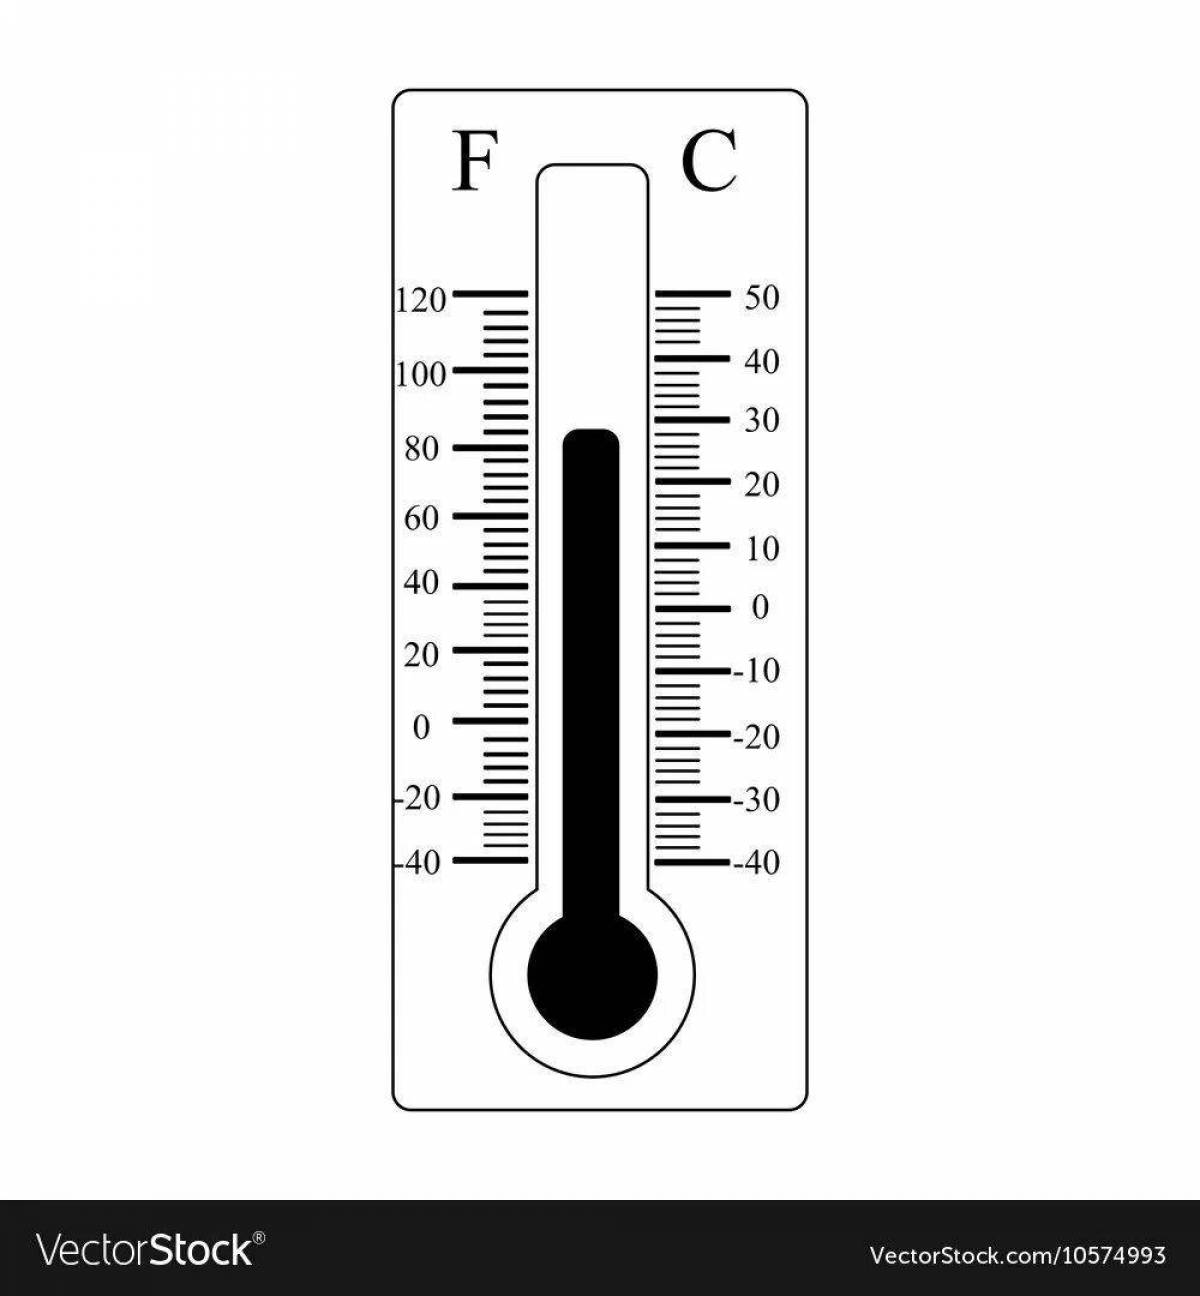 Children's coloring thermometer